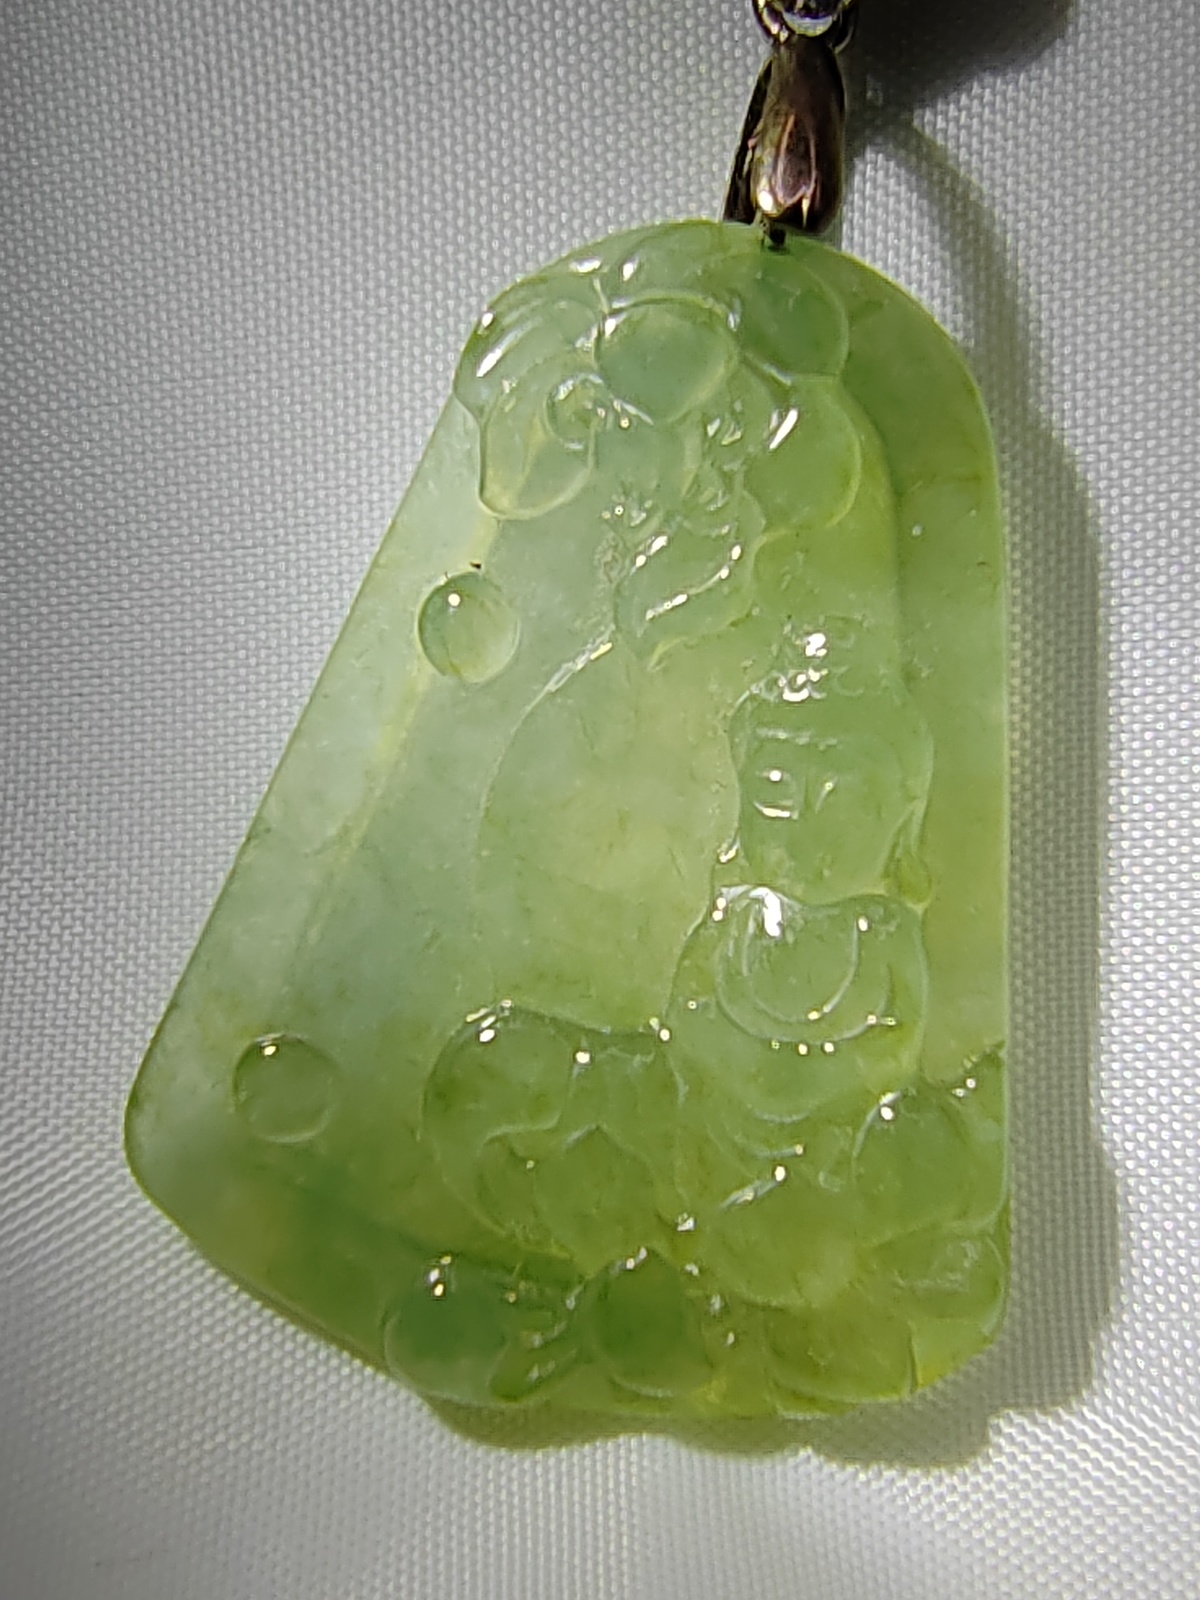 Primary image for Glassy Ice Clear Natural Burma Jadeite Jade Enlightenment Pendant # 38.20 carat